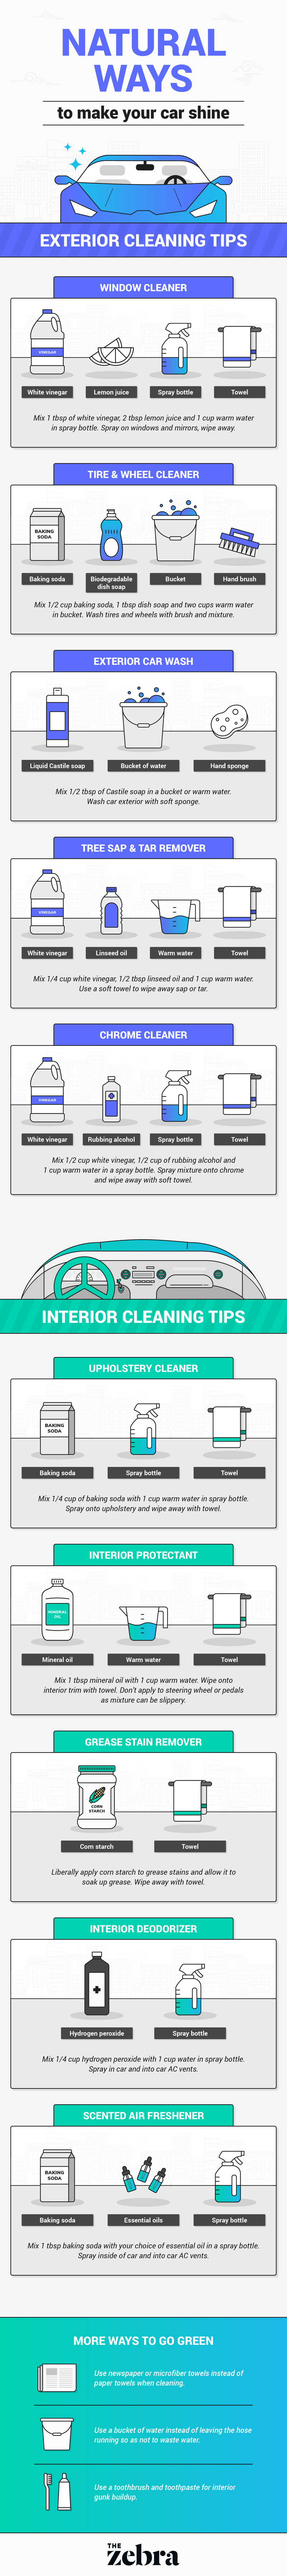 best natural car cleaning products